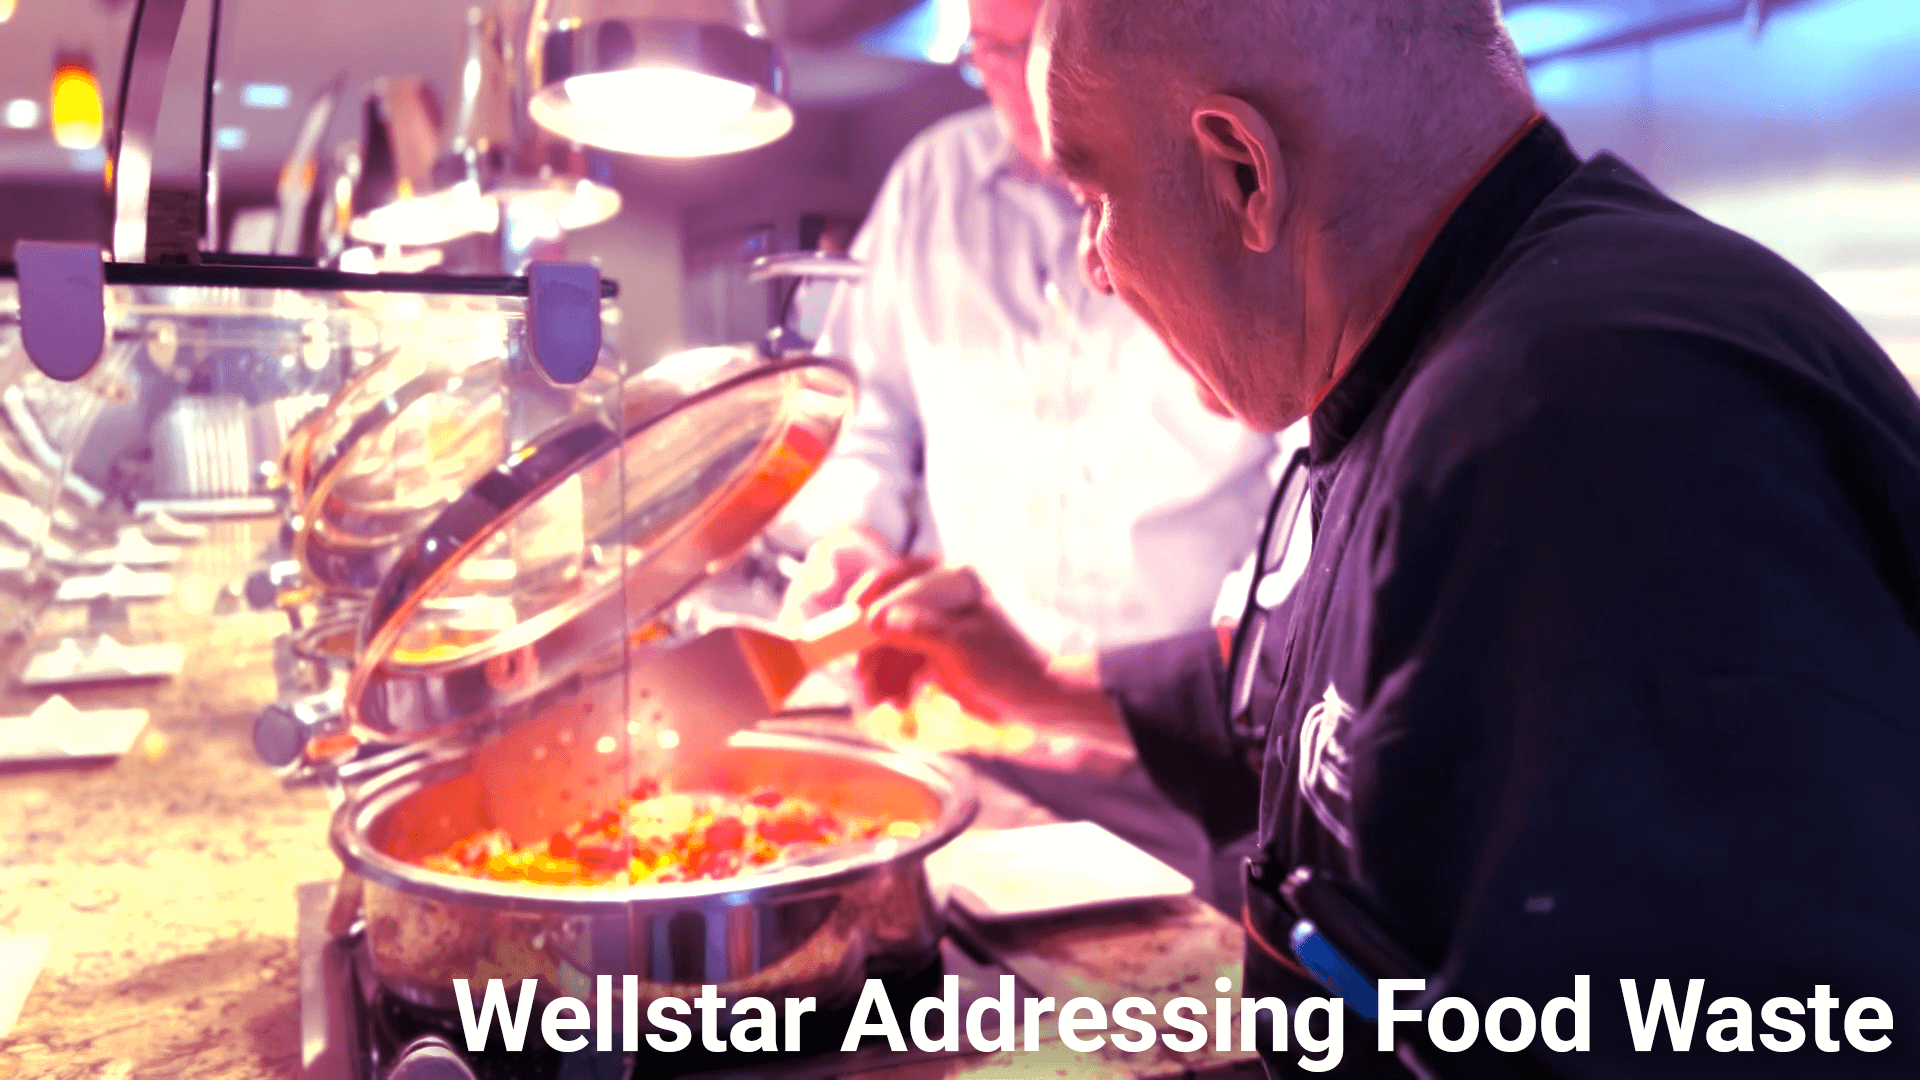 Chef Michael at the Wellstar Corporate Office bistro and title "Wellstar Addressing Food Waste."